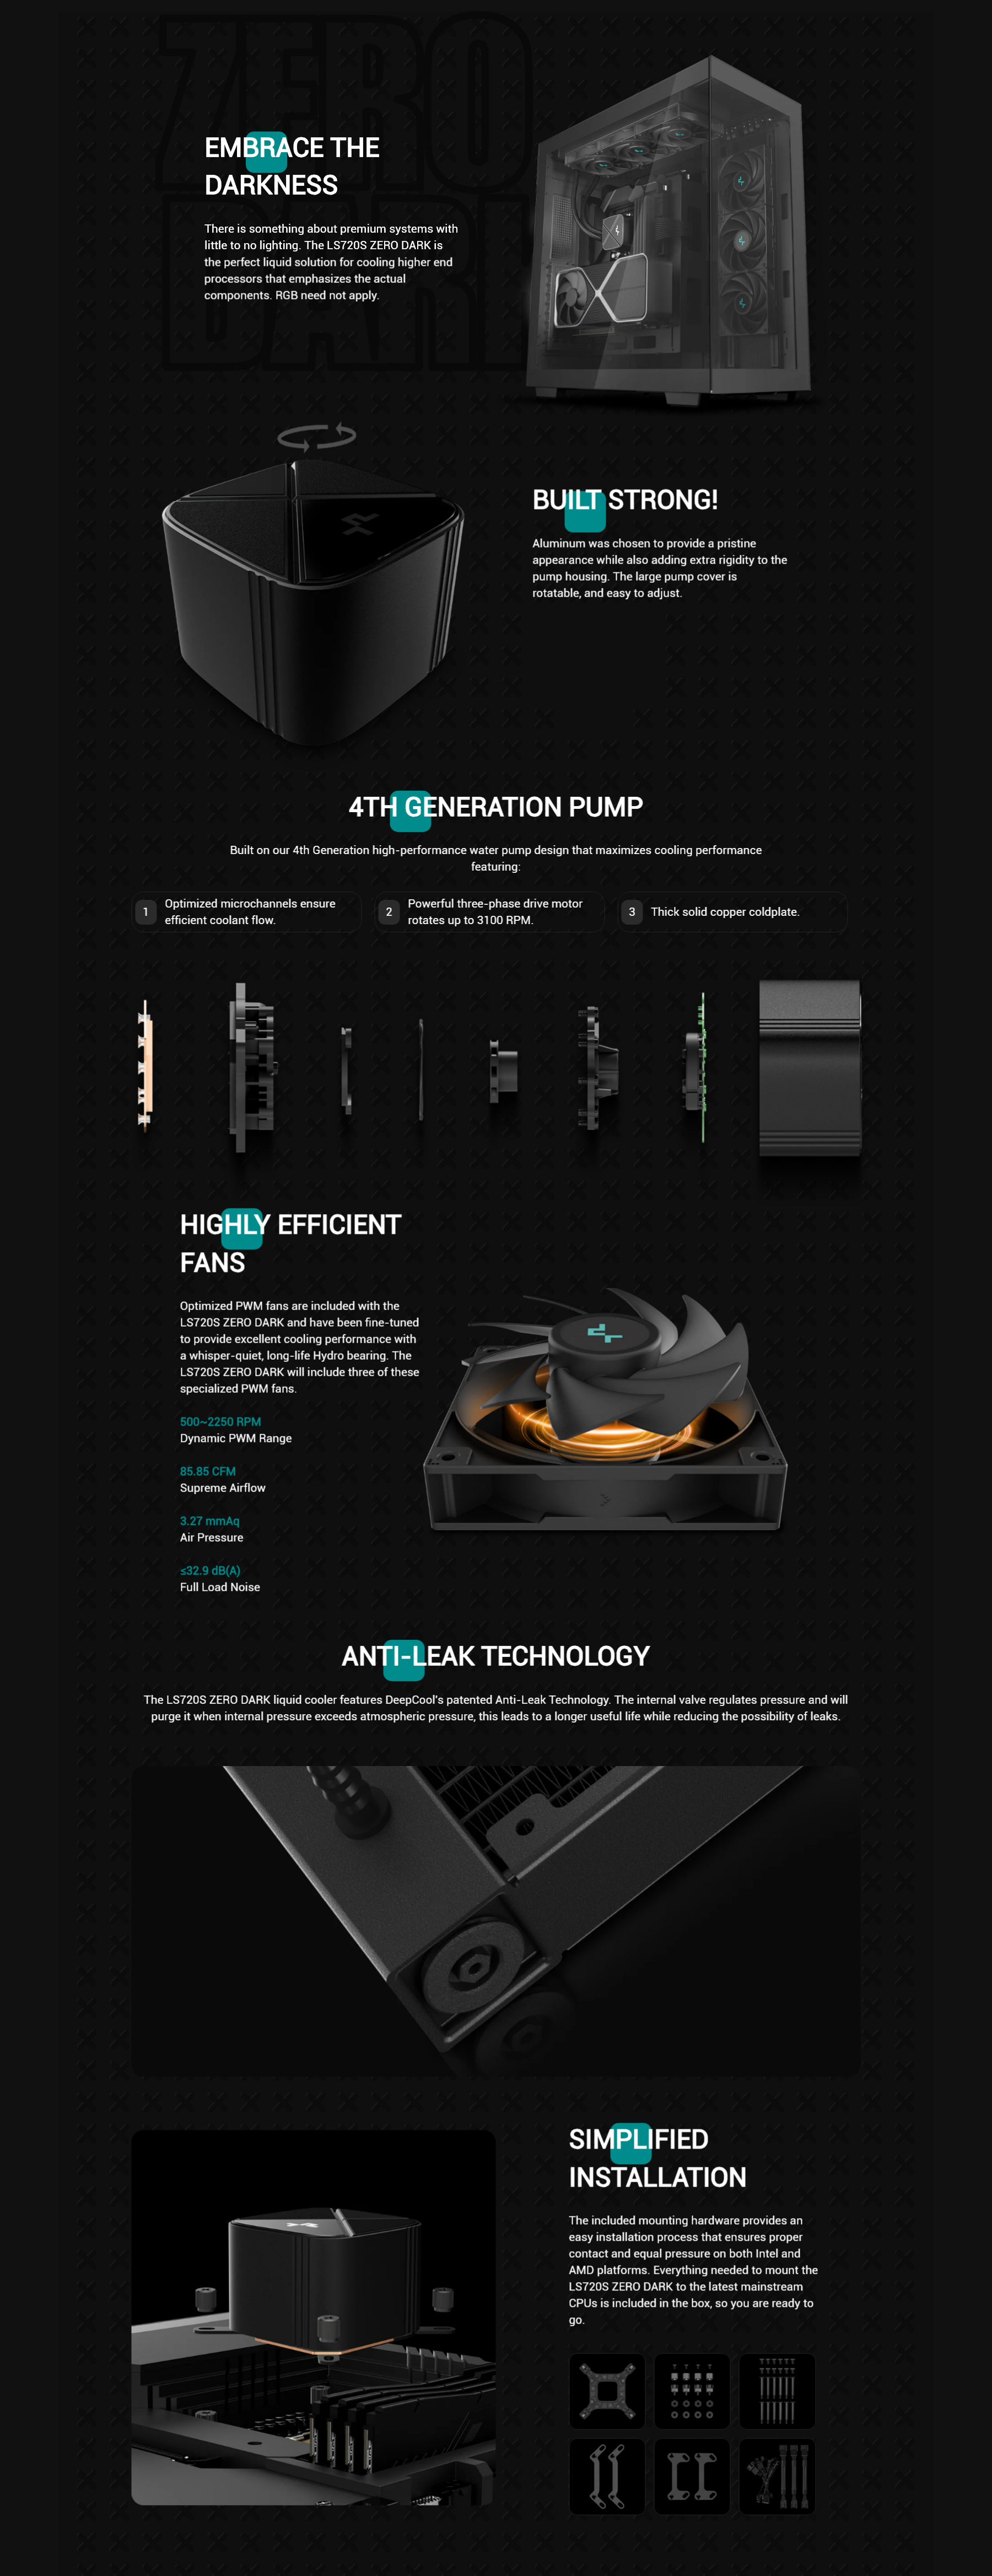 A large marketing image providing additional information about the product DeepCool LS720S Zero Dark 360mm AIO Liquid CPU Cooler - Black - Additional alt info not provided